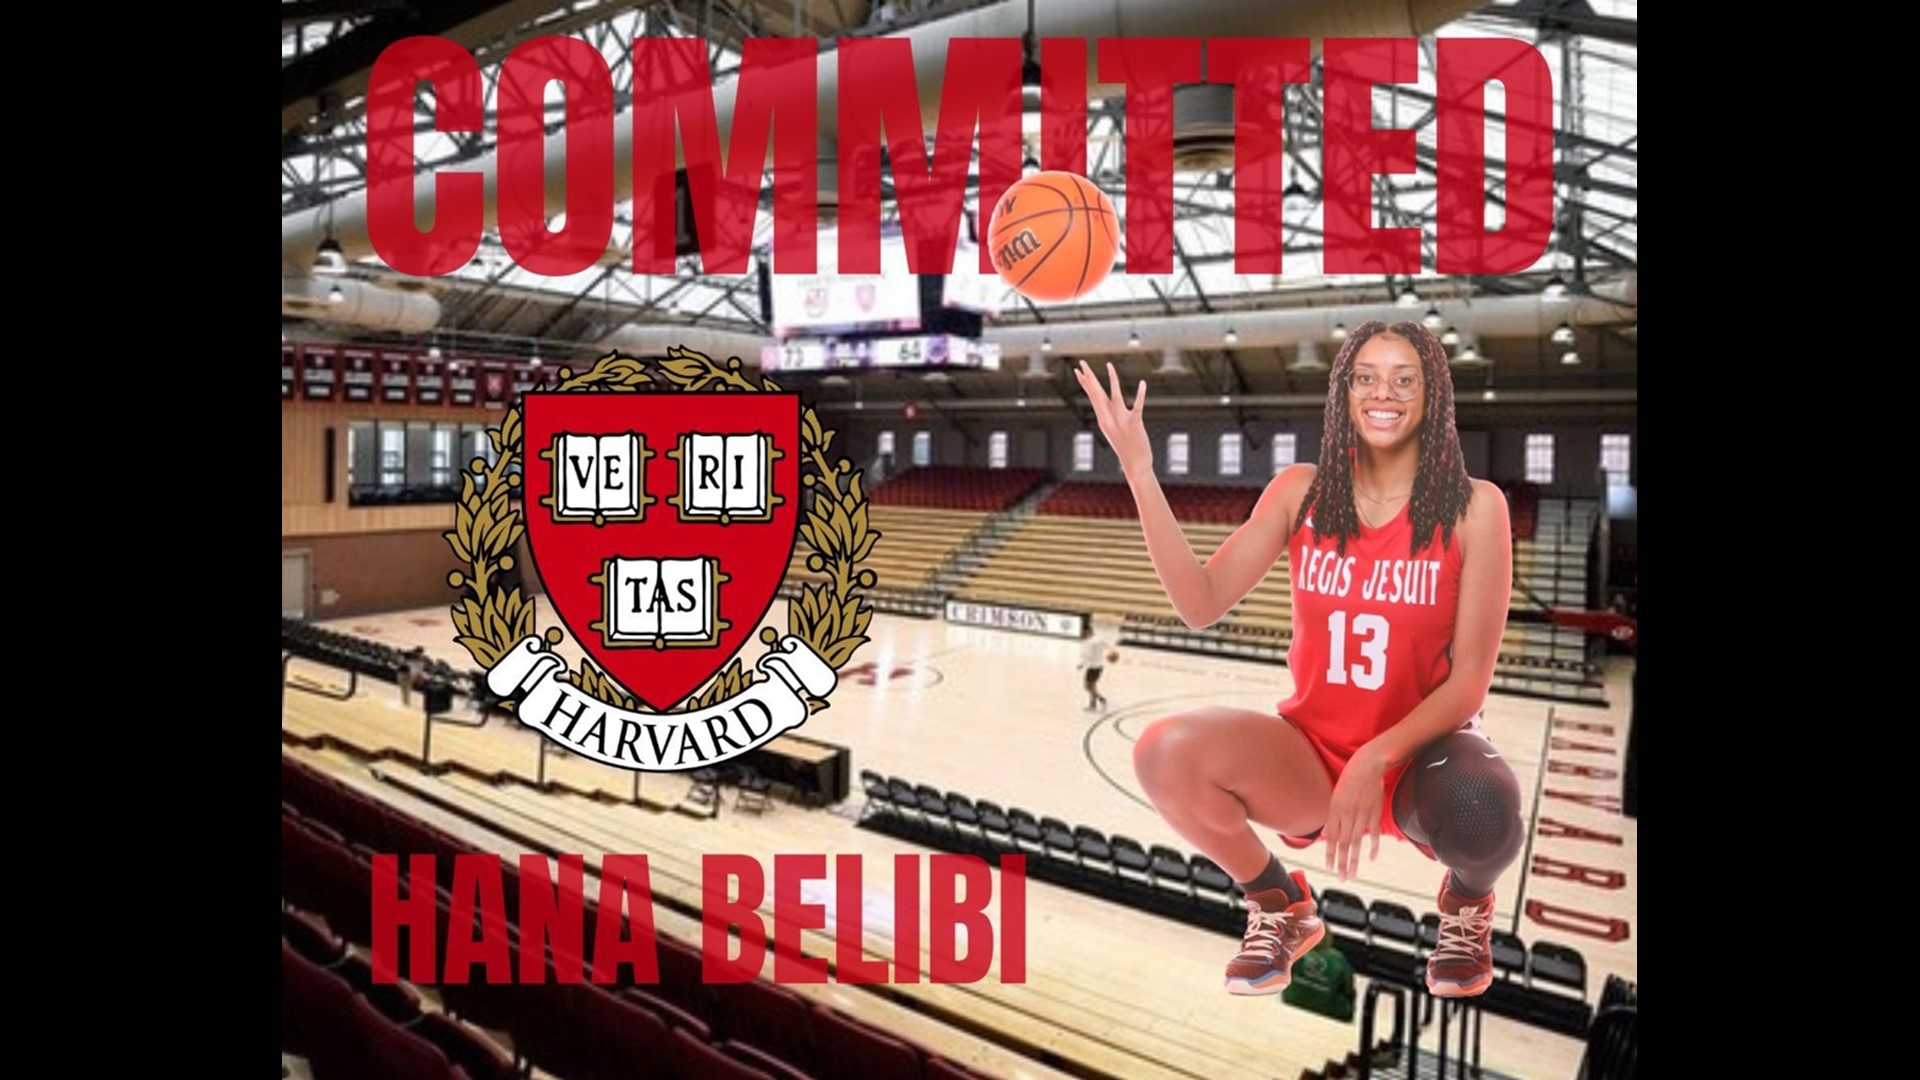 Fran Belibi put her family's name on the map during her time at Regis Jesuit and now her little sister Hana is carrying on the legacy, IVY League style.